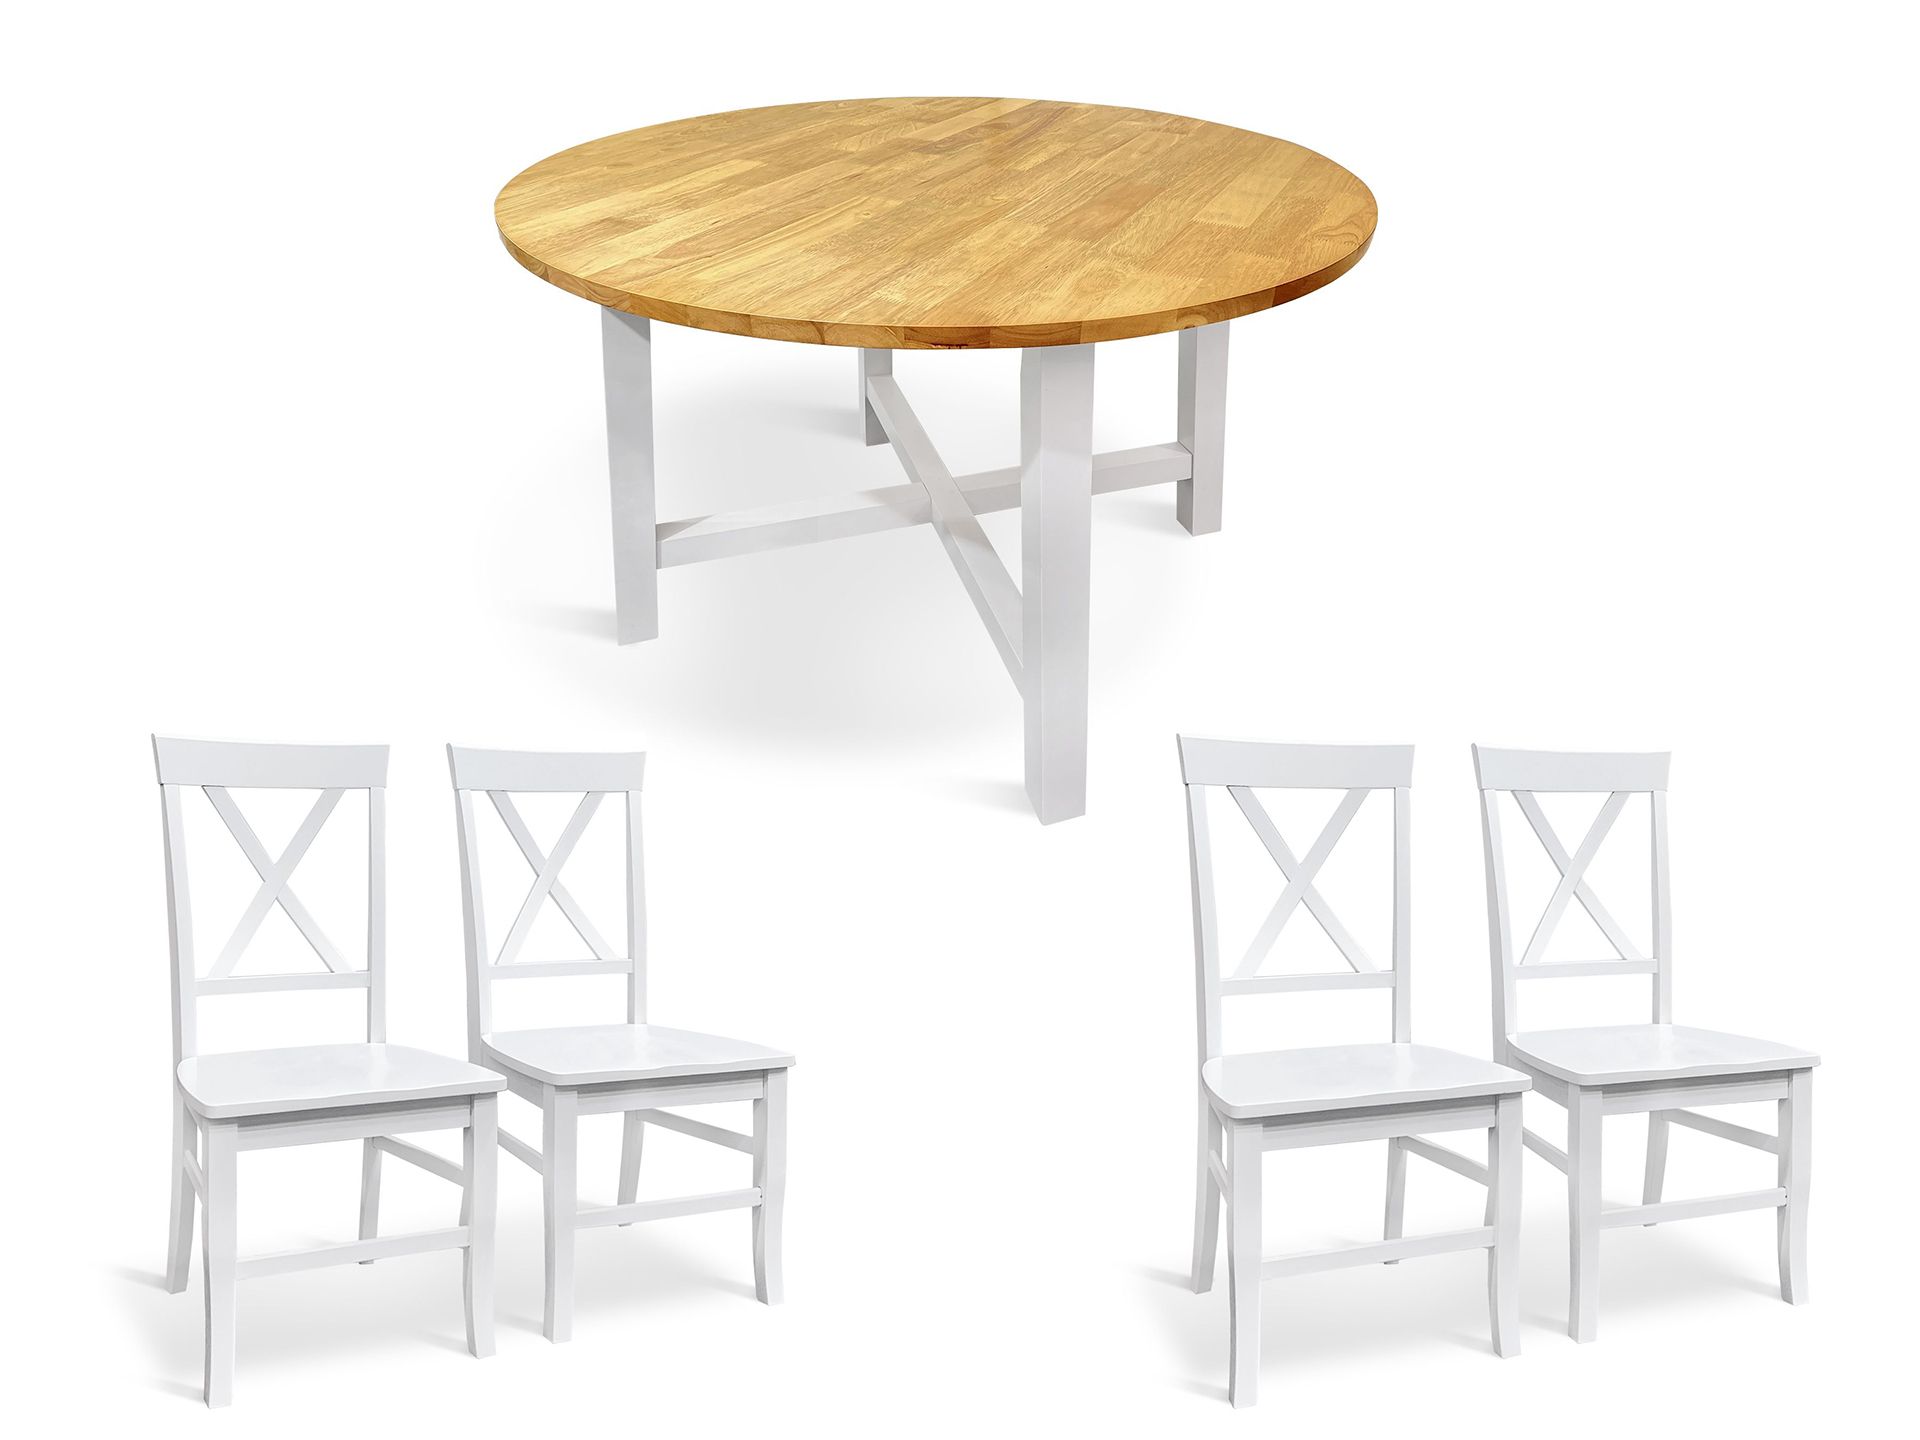 Bali 5 Piece Dining Room Furniture Package - White